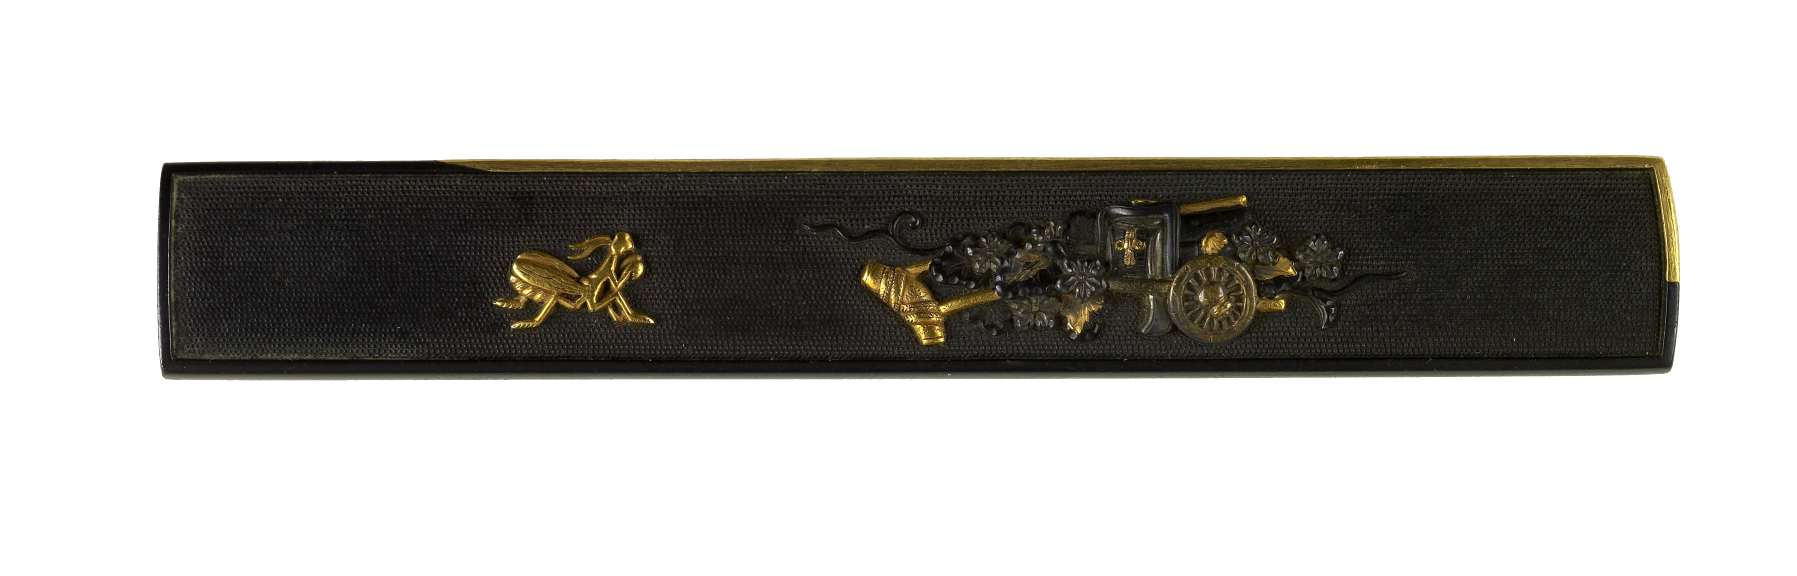 Image for Kozuka with Flower Cart with a Praying Mantis